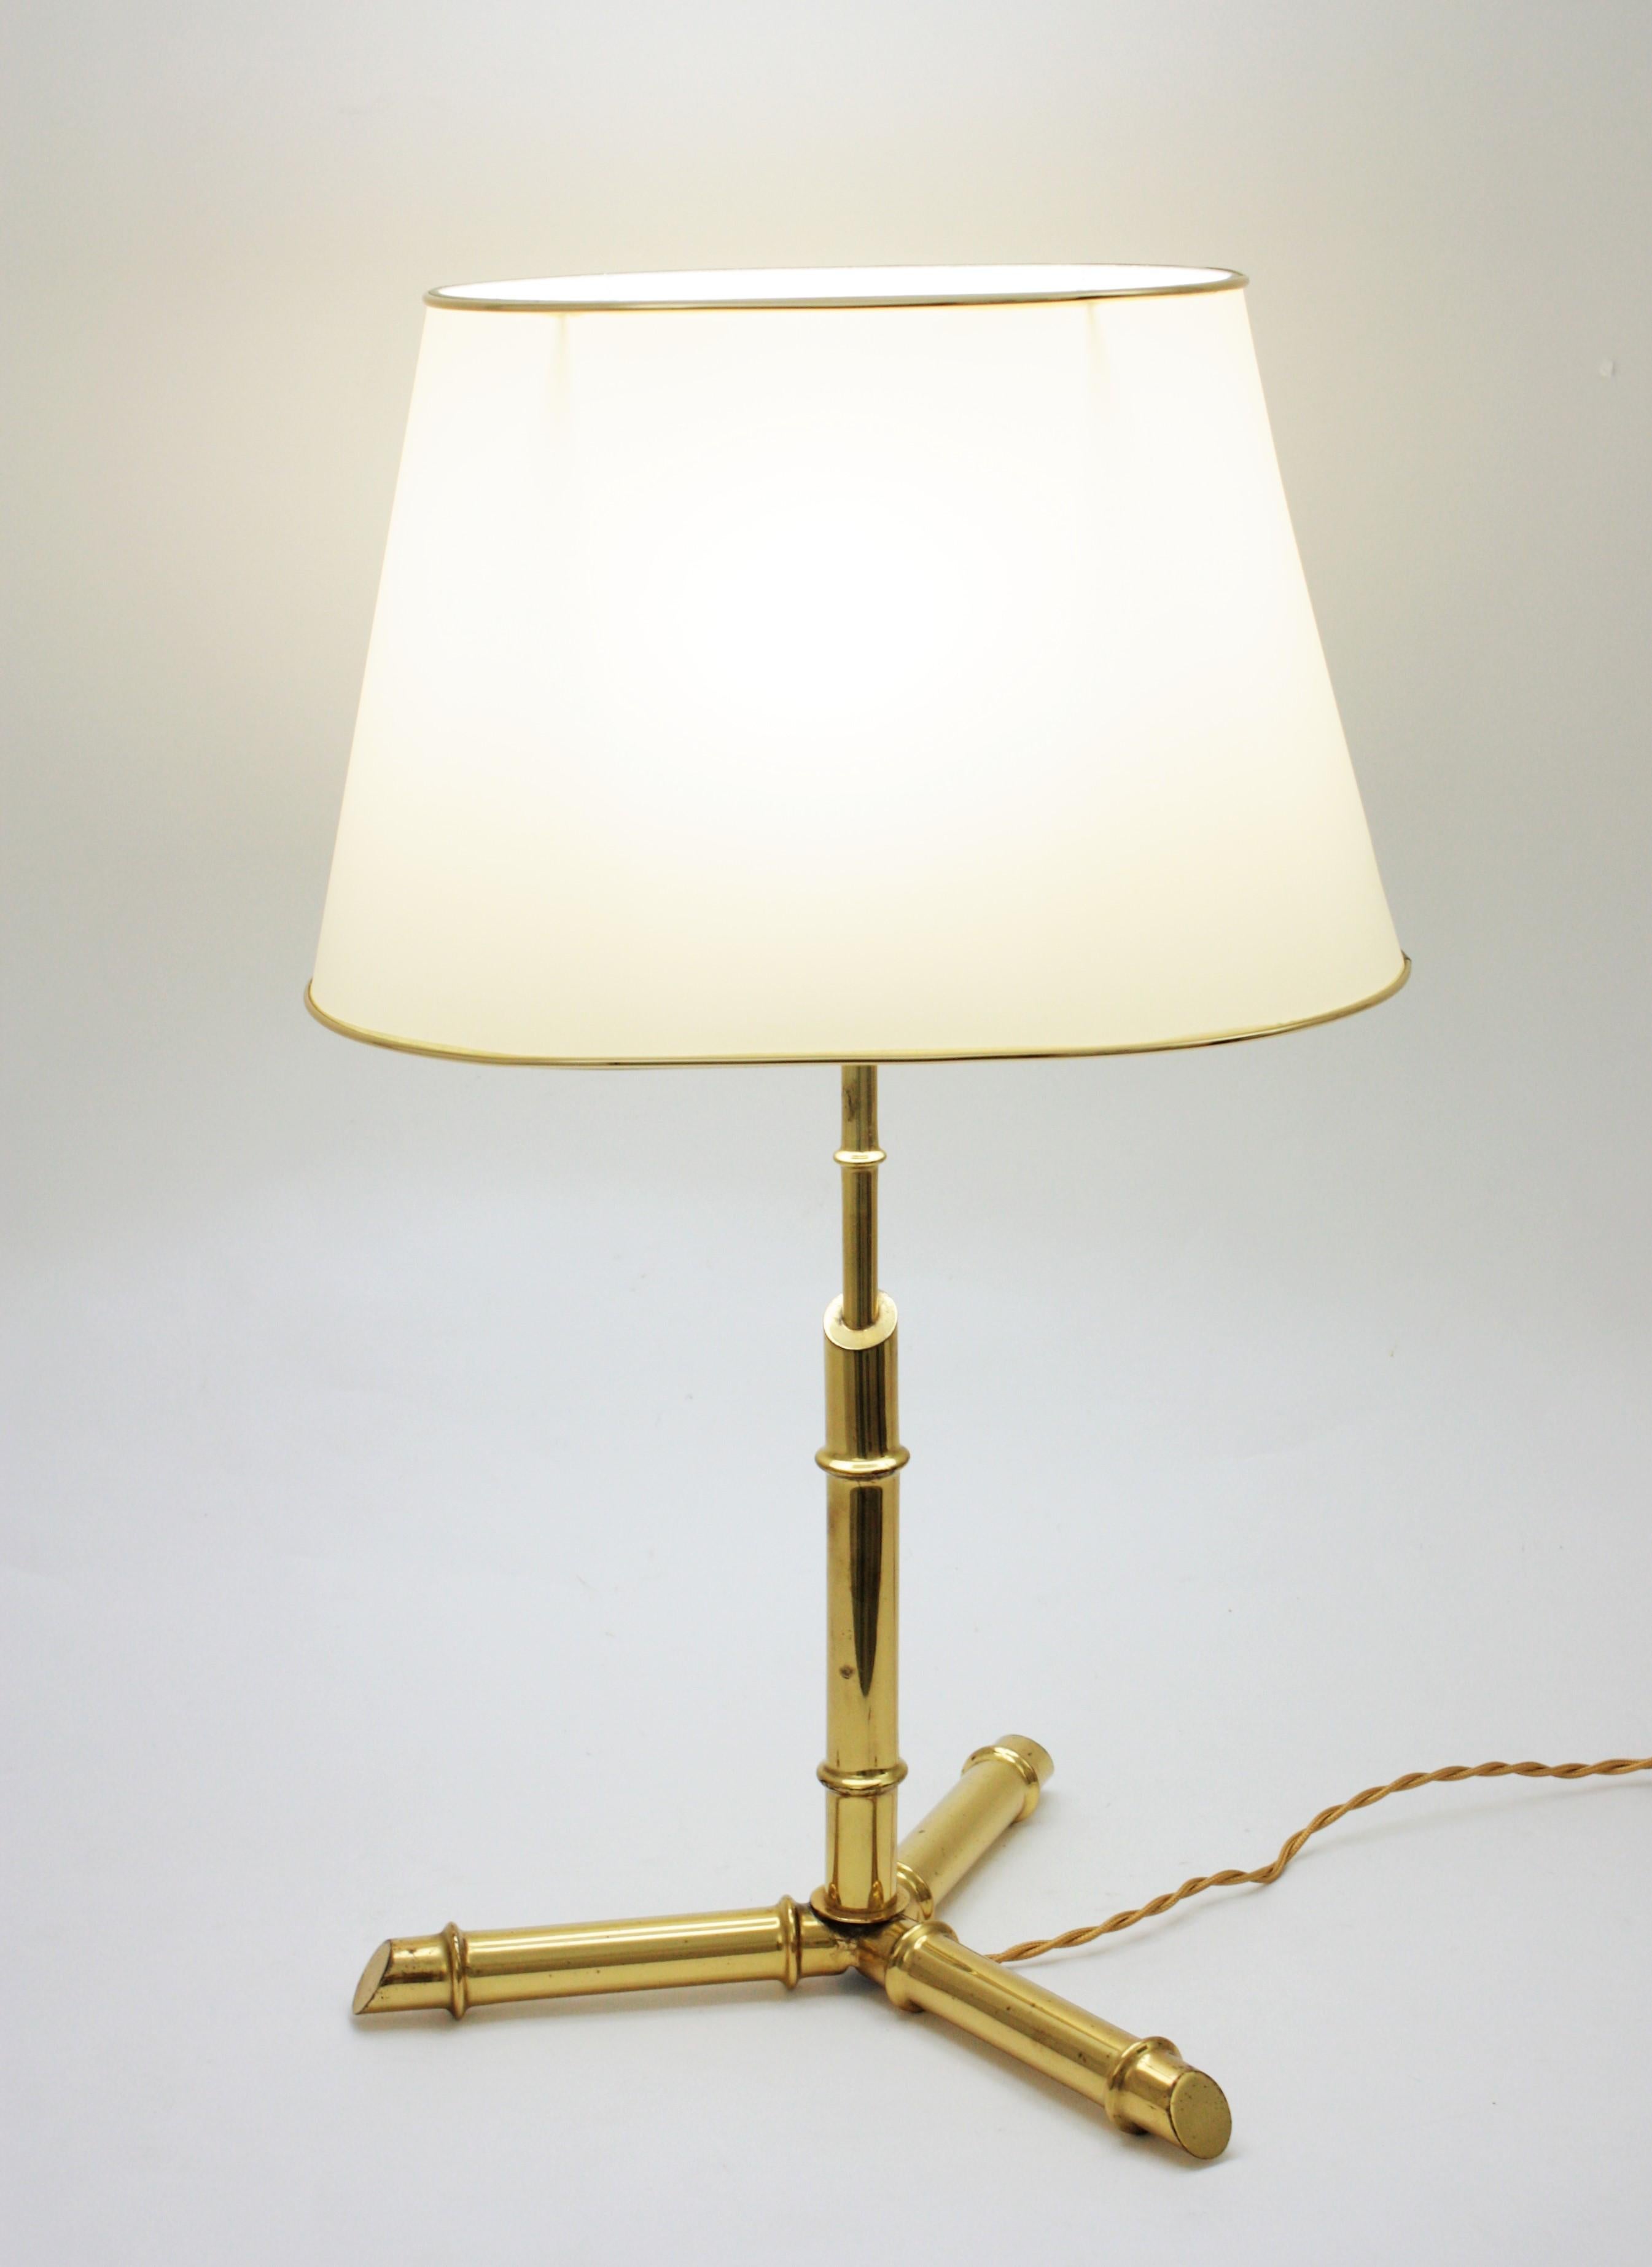 Italian Faux Bamboo Tripod Table Lamp in Brass, 1970s For Sale 8